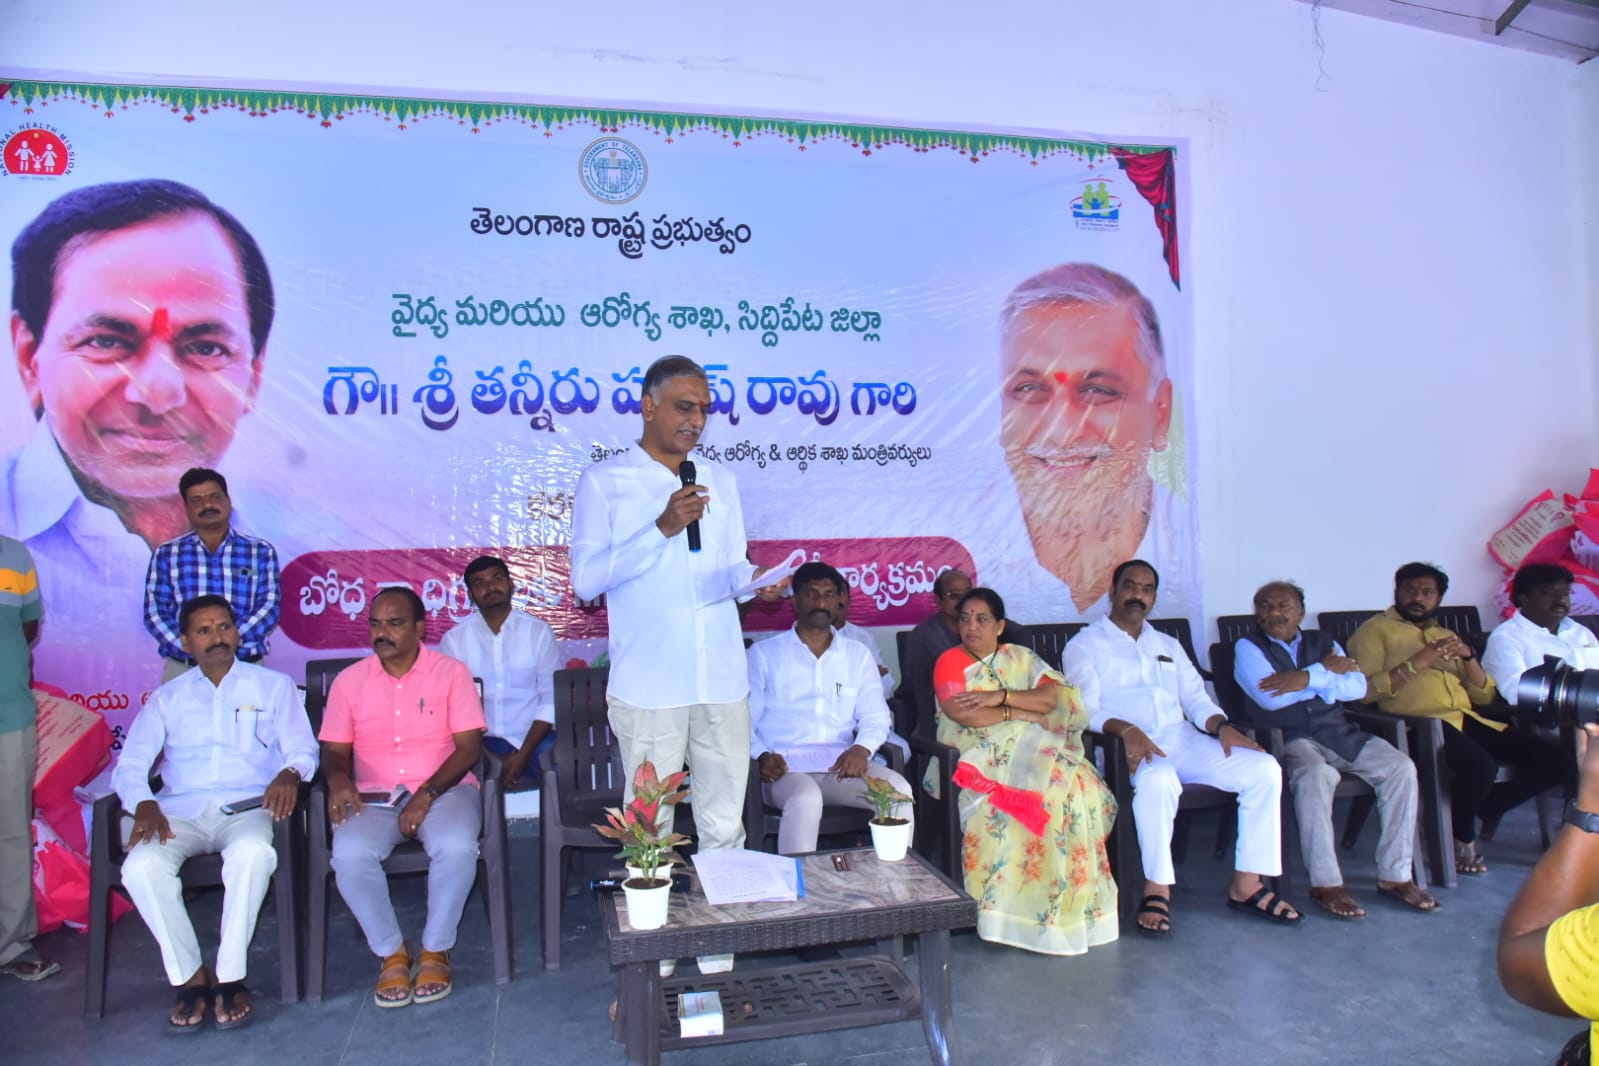 Health kits distributed among filariasis patients in Siddipet